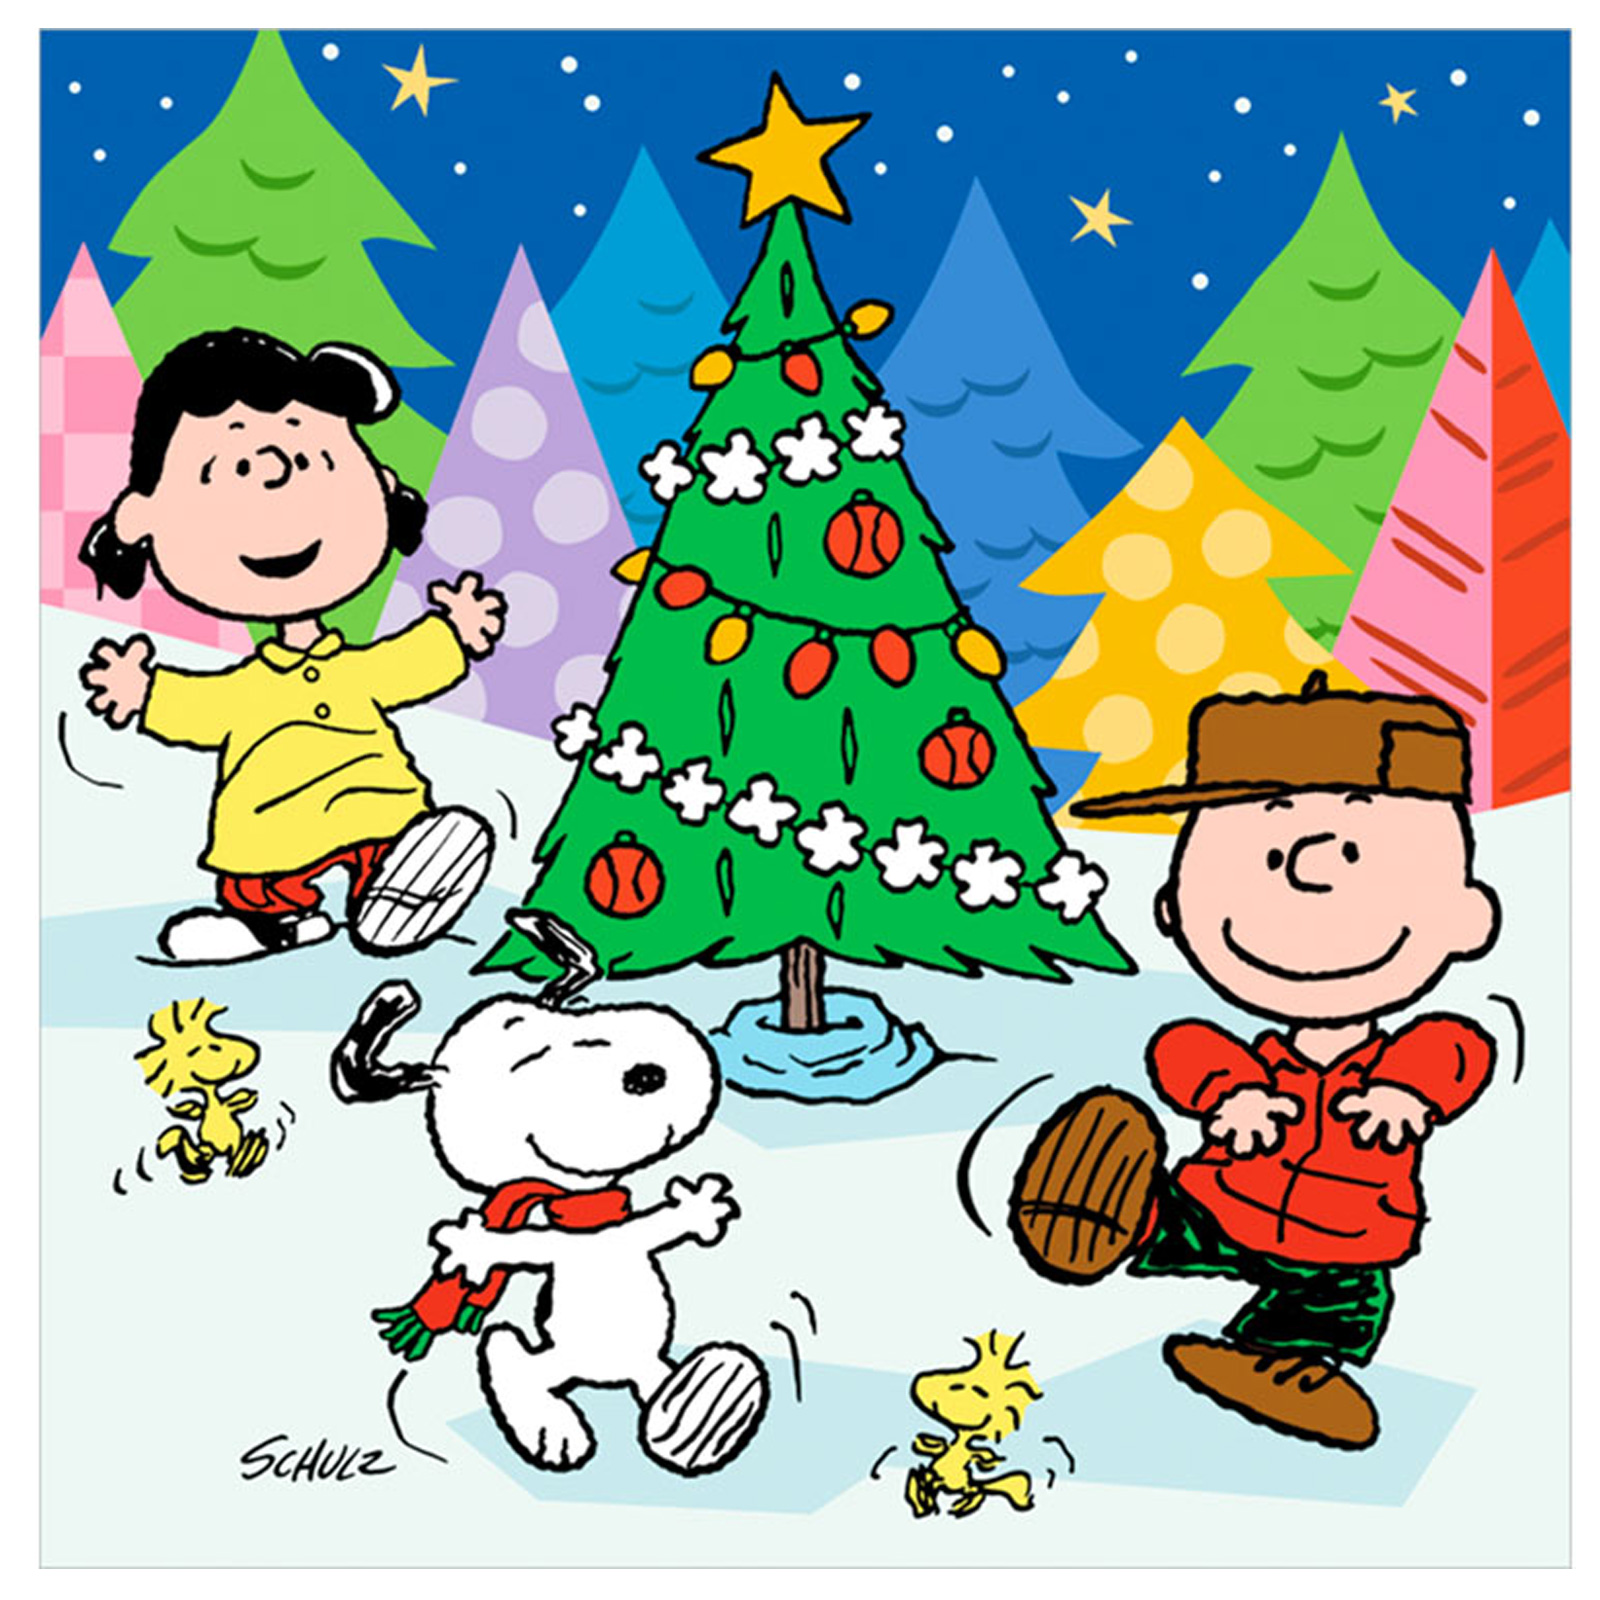 snoopy winter wallpapers top free snoopy winter on the peanuts winter wallpapers